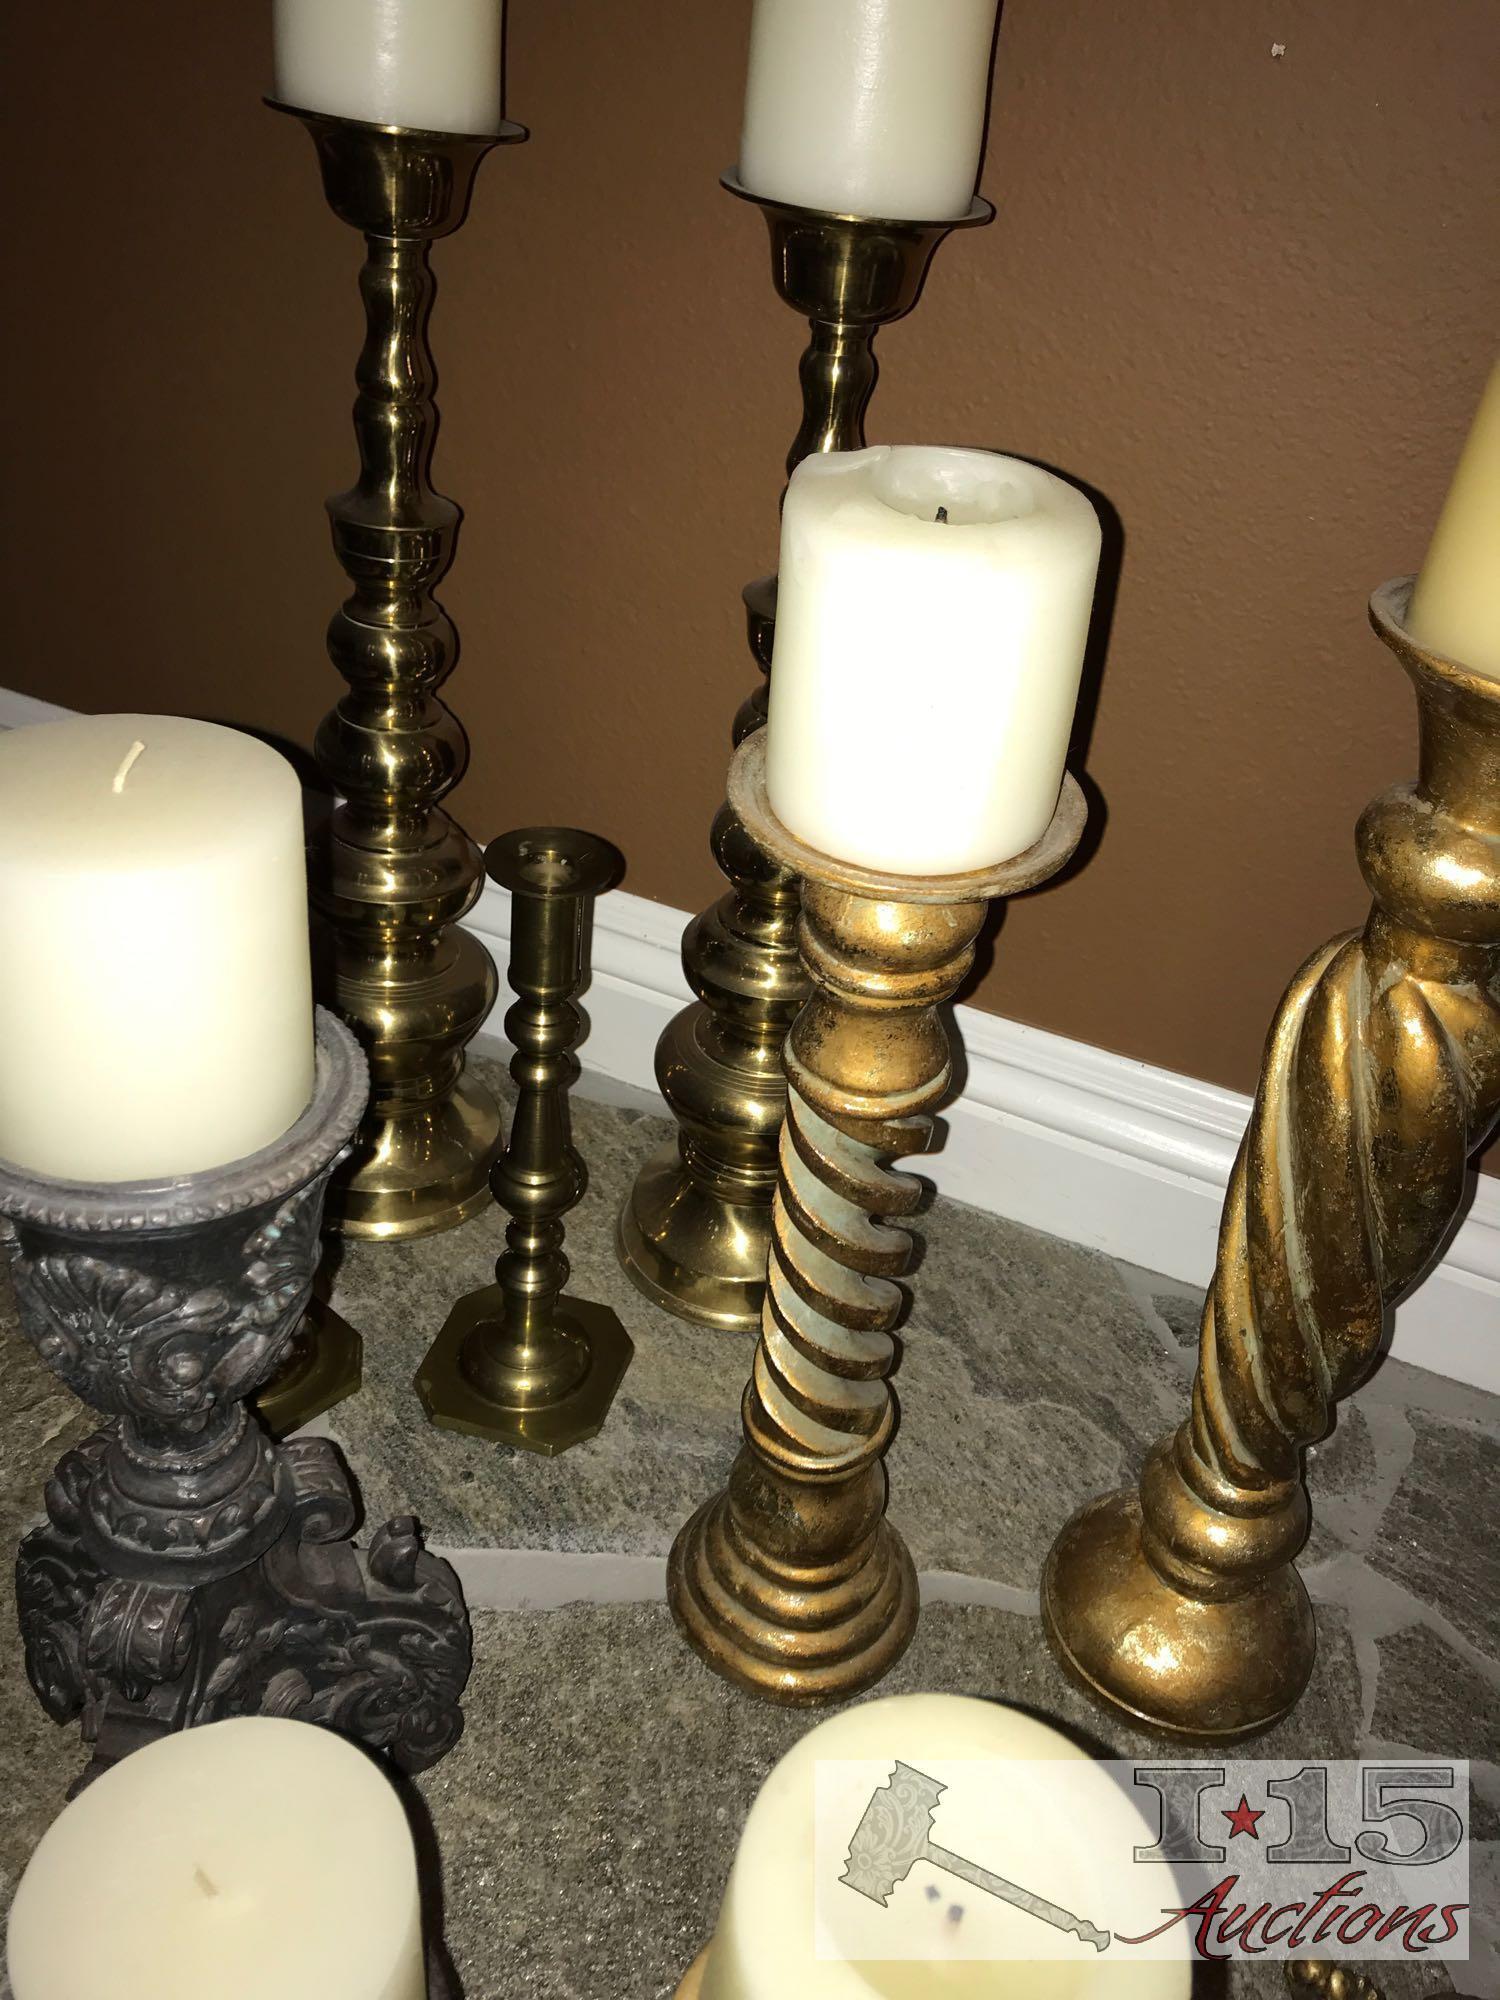 Huge candle holder and candle lot